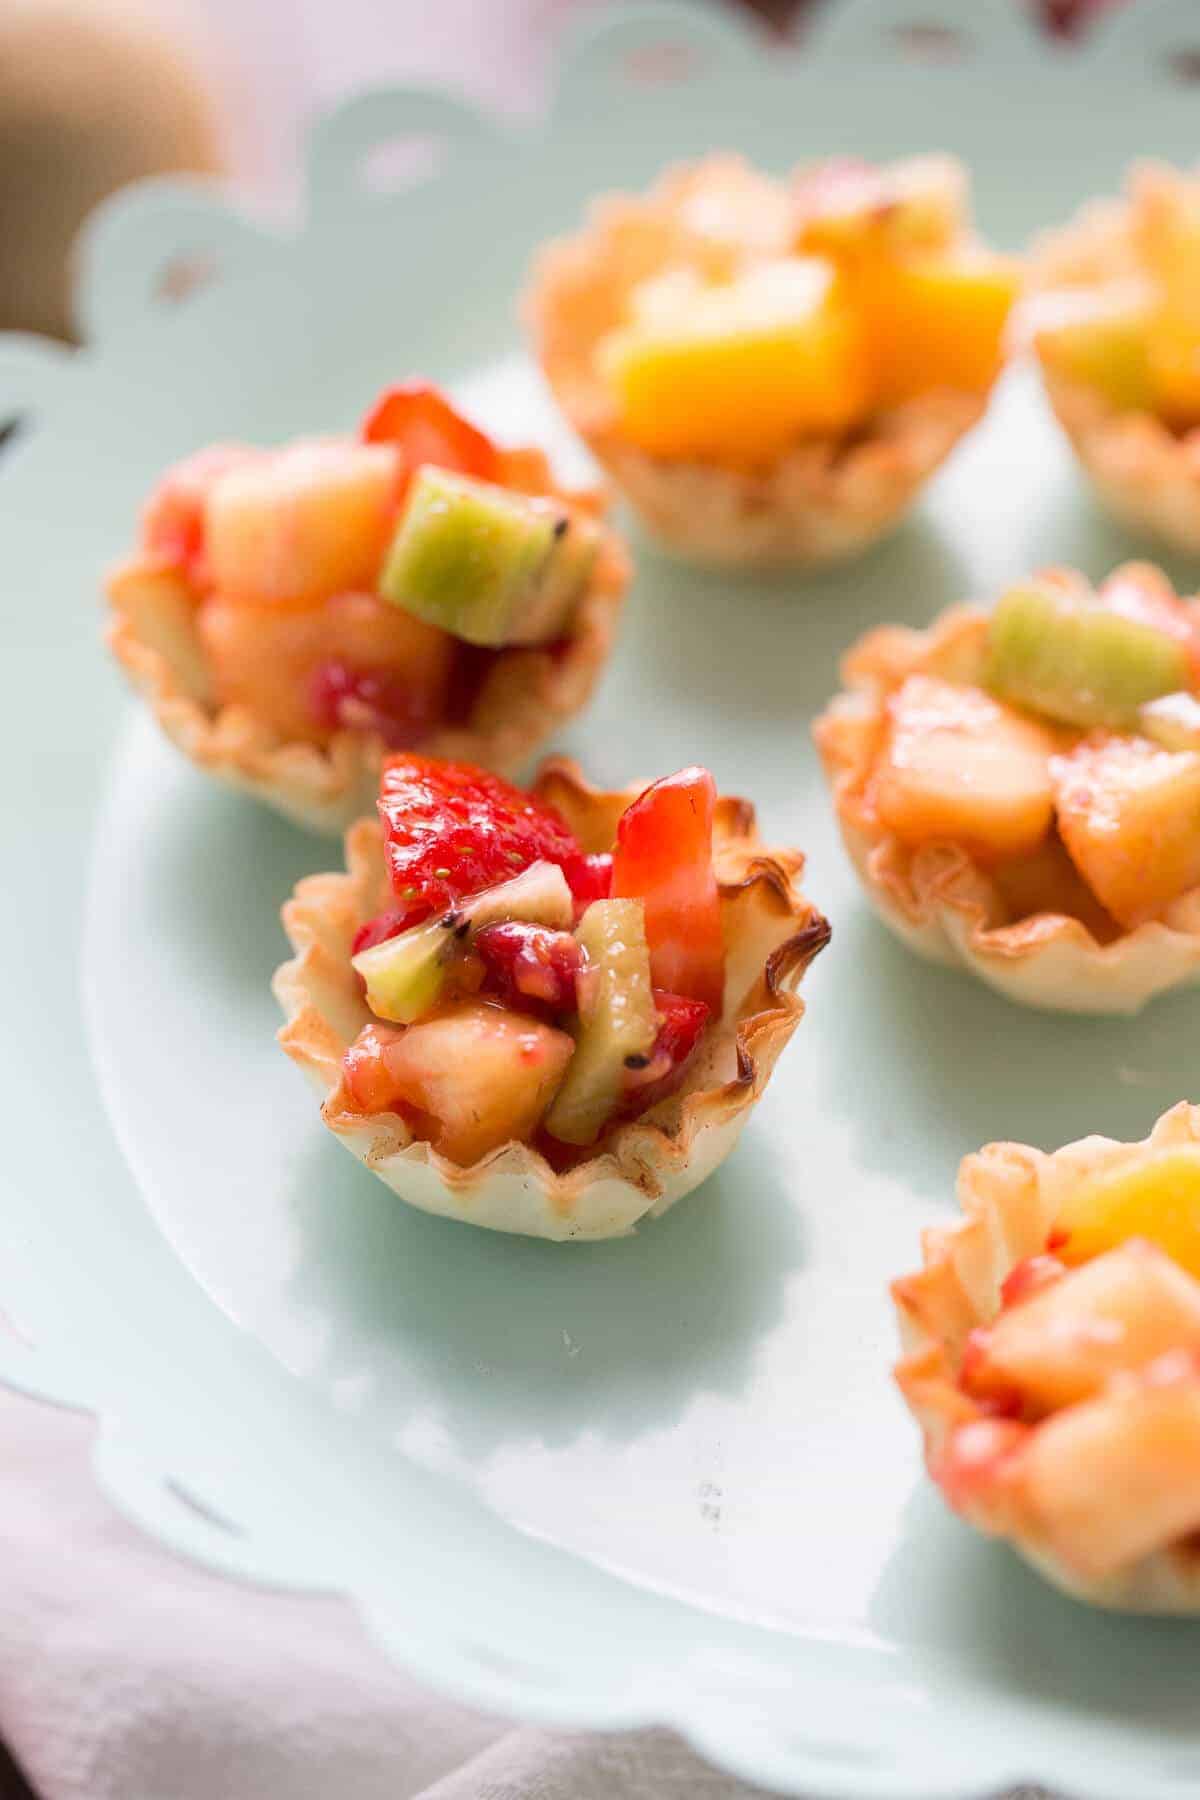 These easy fruit salsa cups are going to be a hit wherever they god! They are so simple to make!